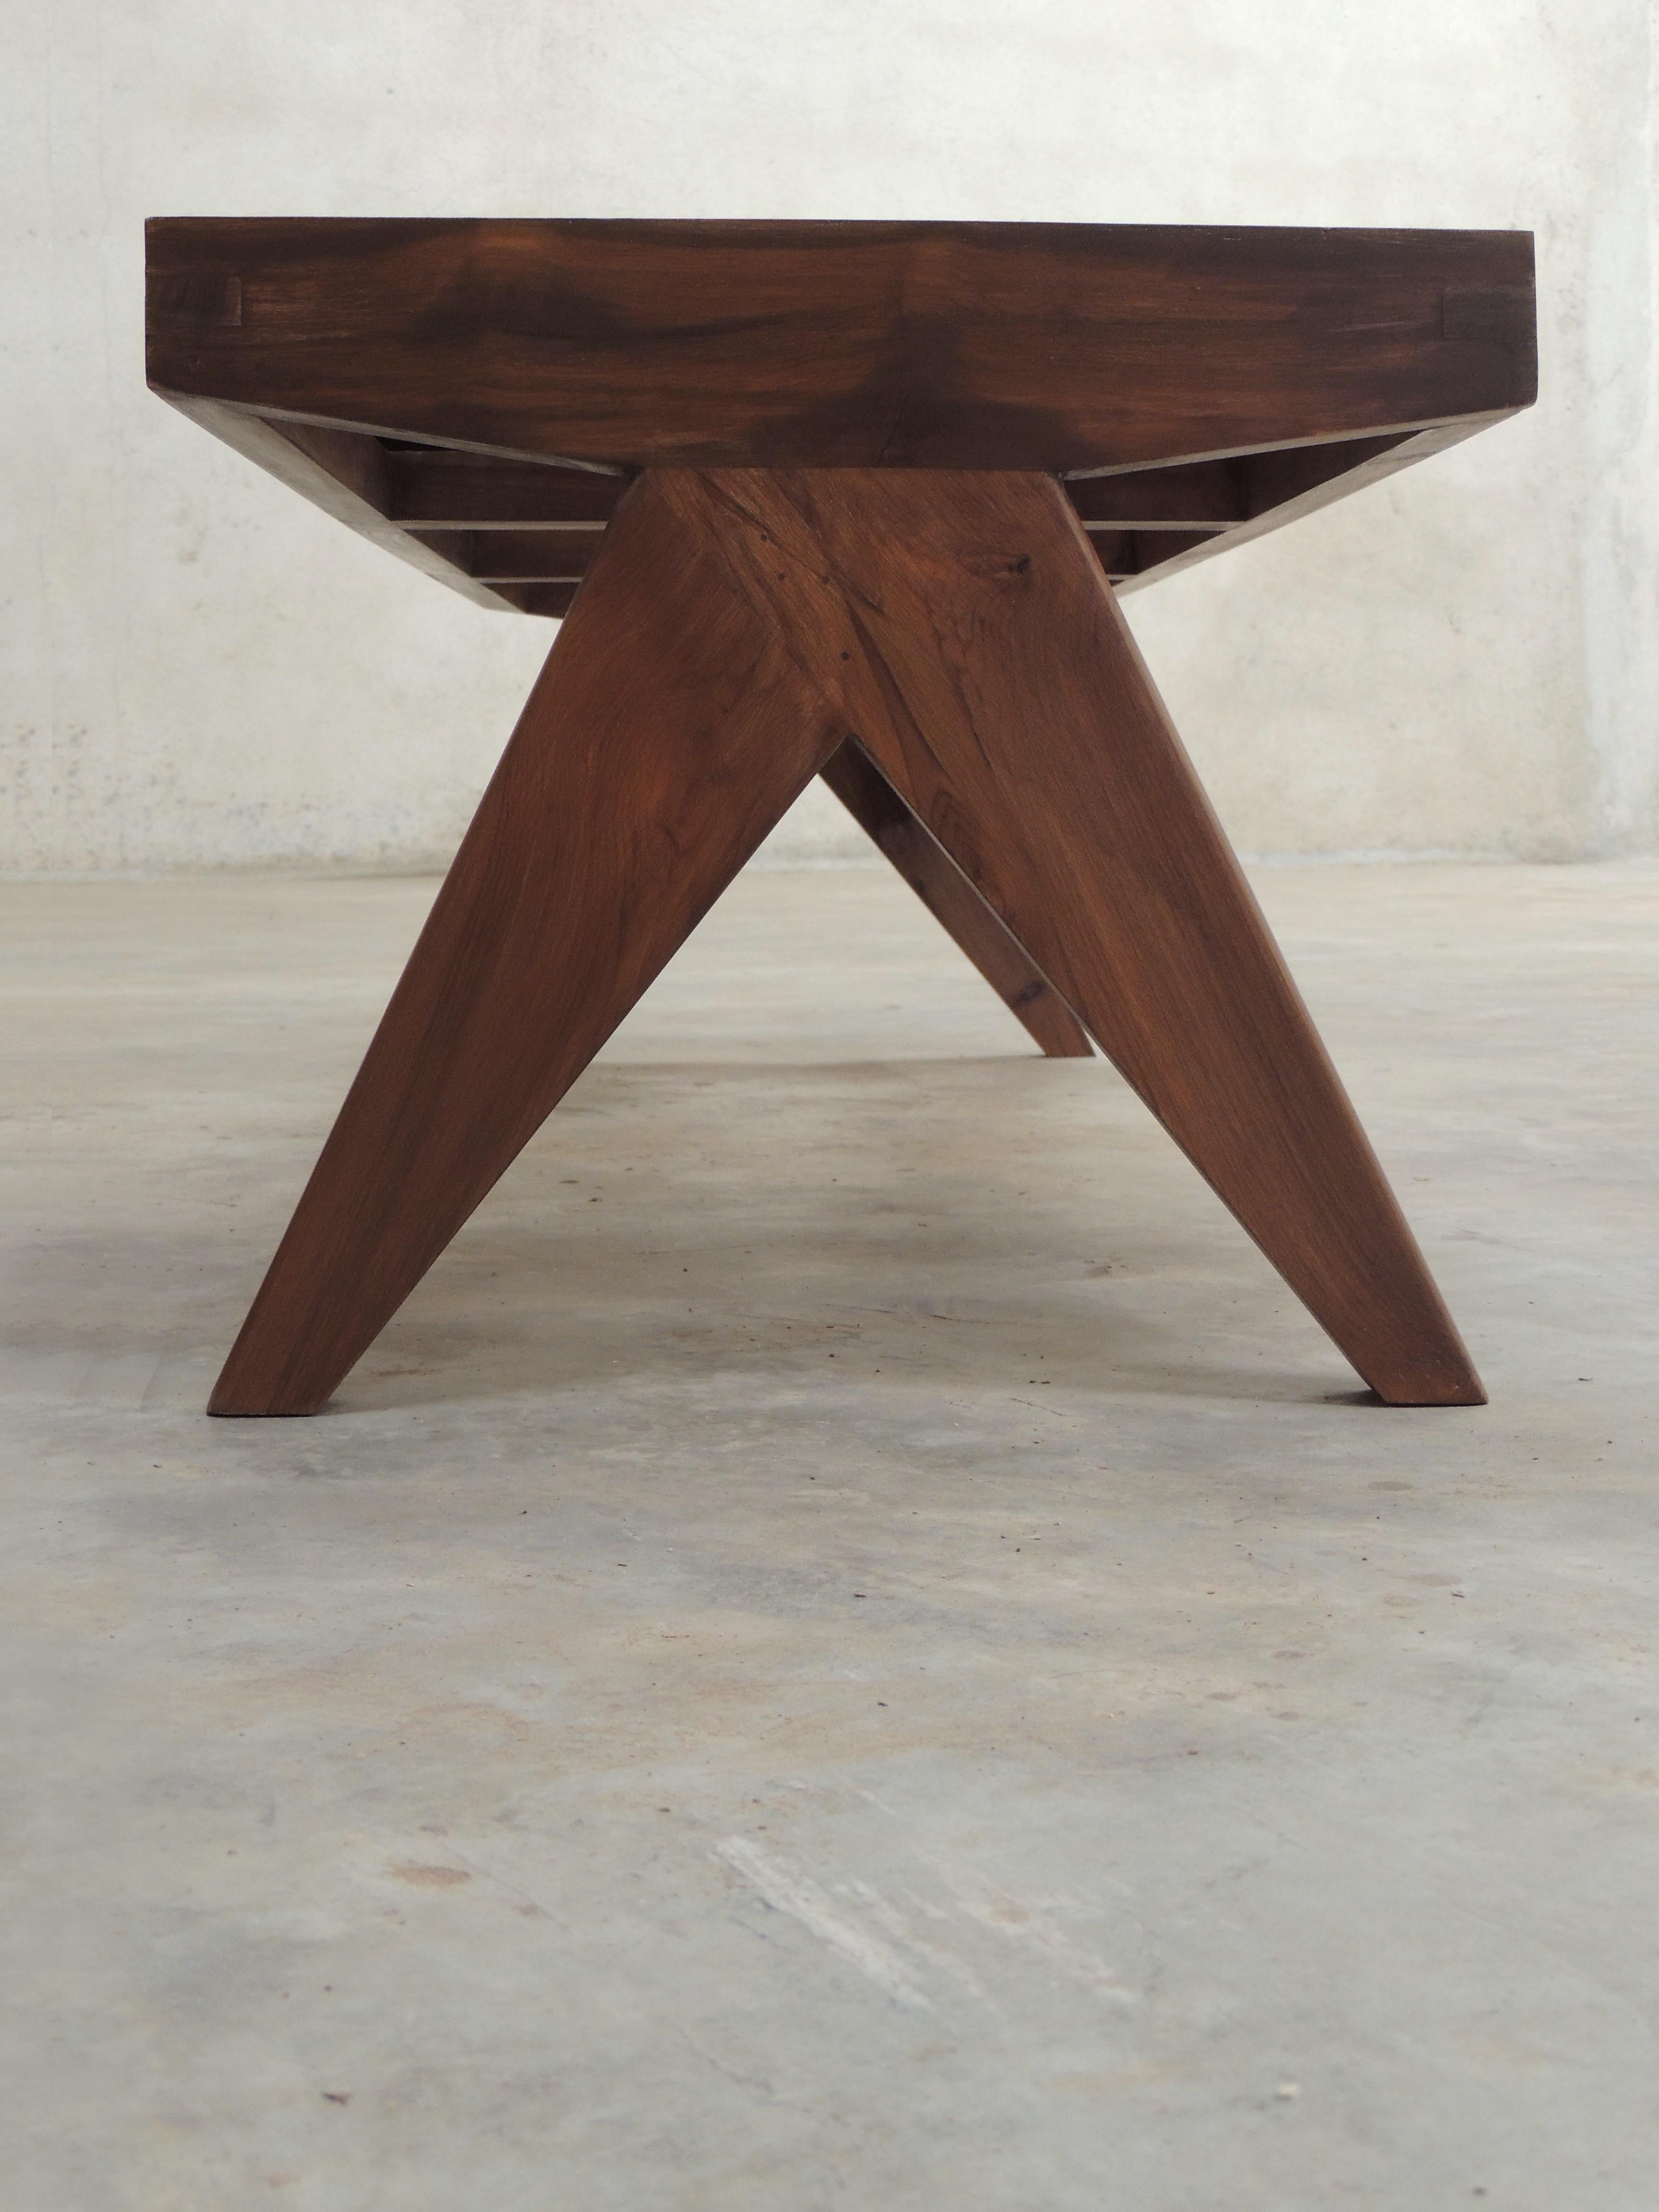 Pierre Jeanneret's Bench, Hand-Sculpted Contemporary Re-Edition 1